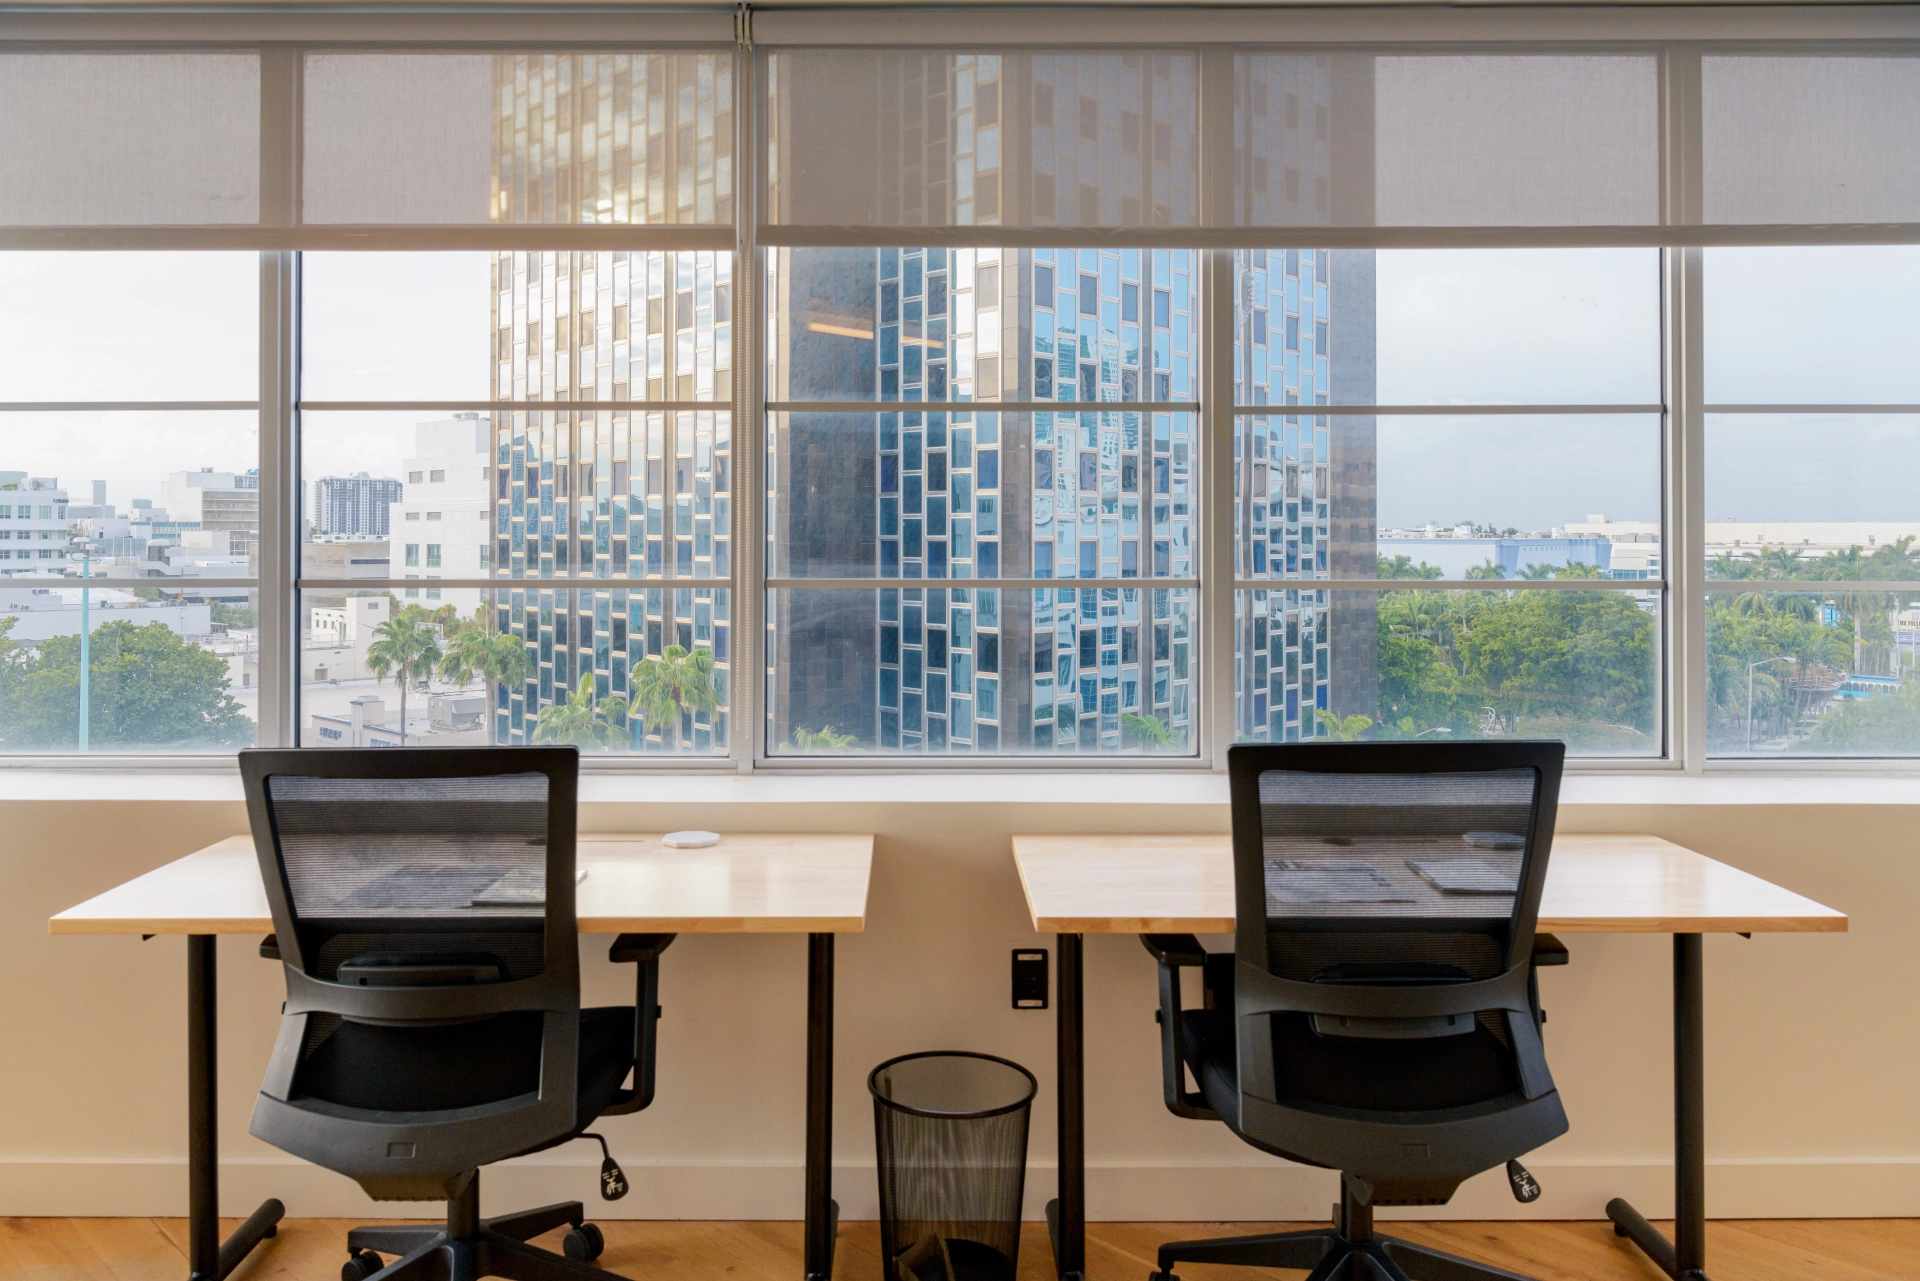 A city view window in an office or coworking meeting room.